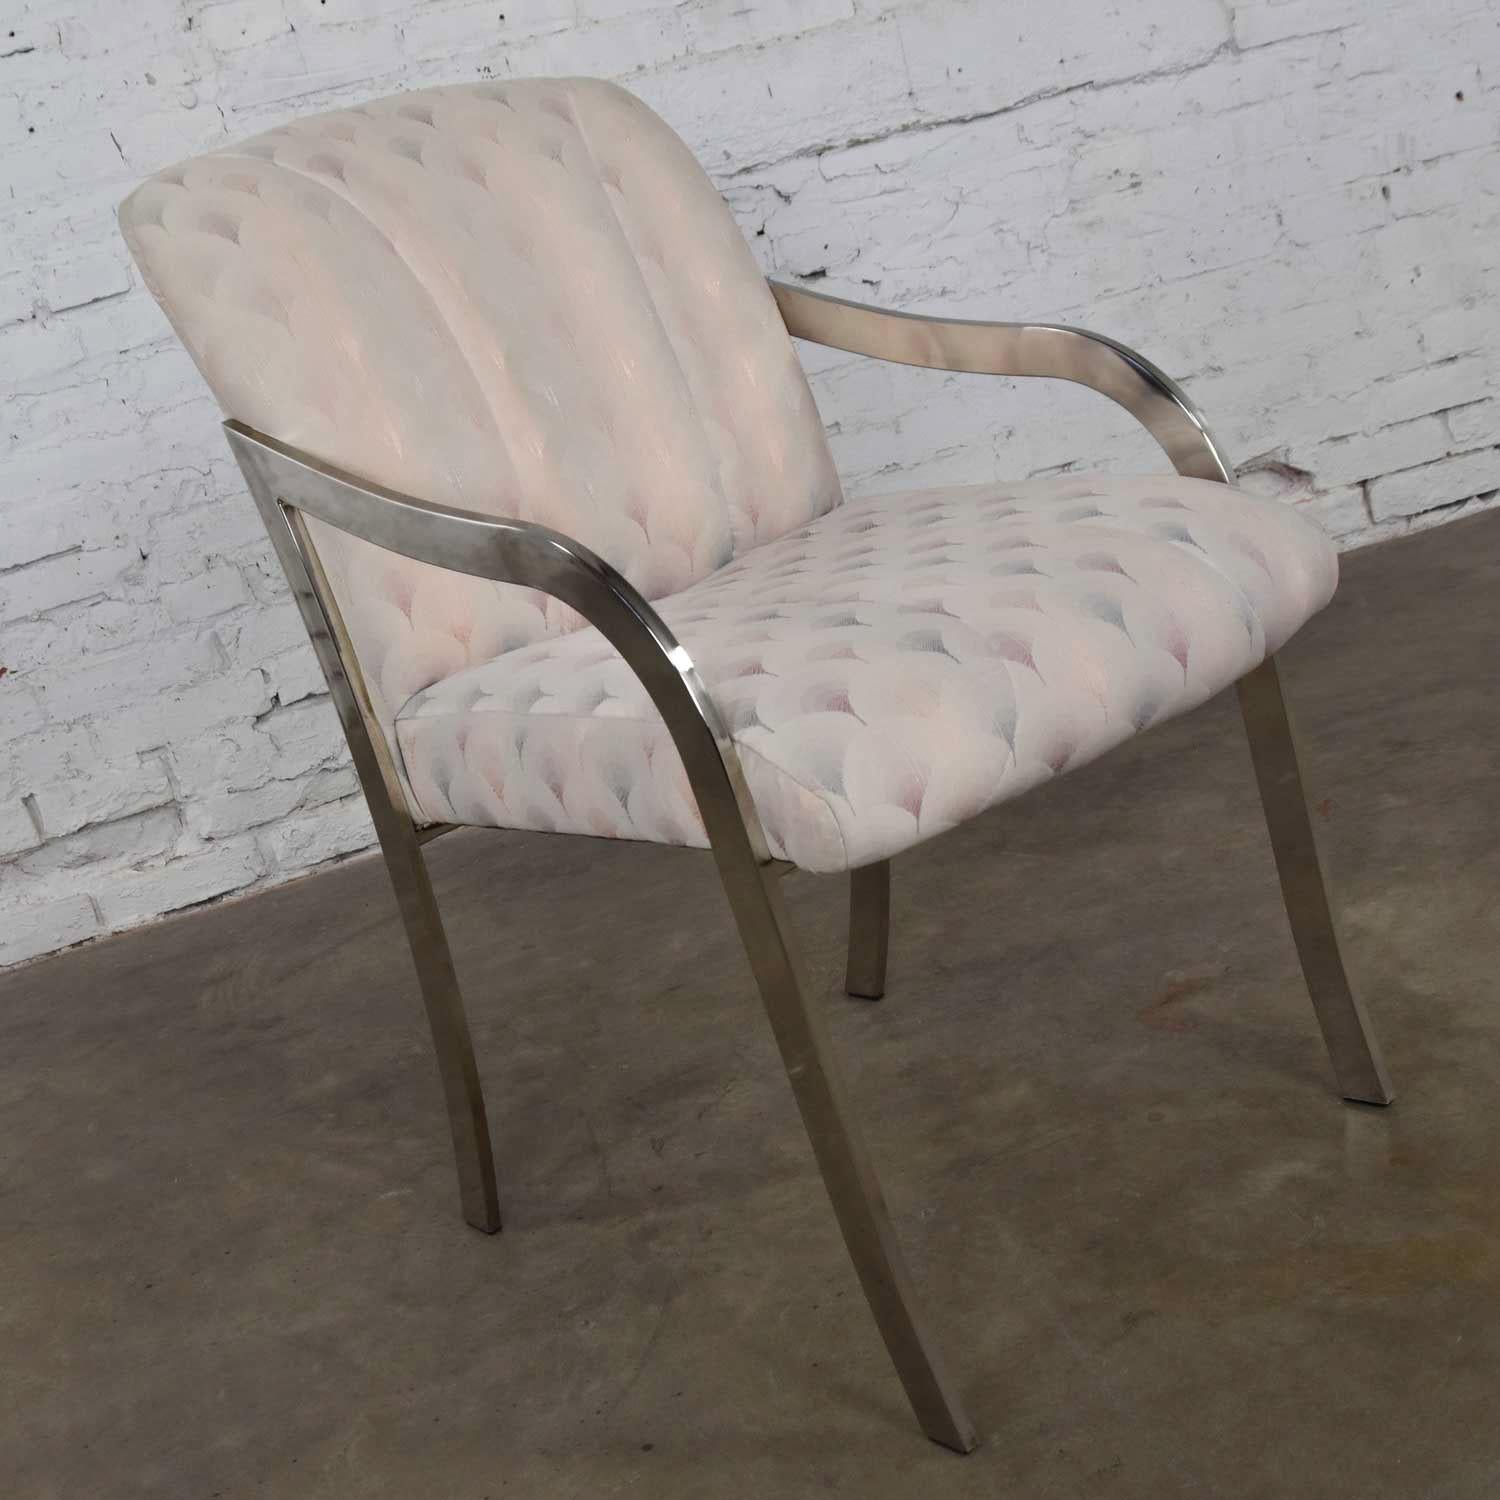 Handsome Art Deco Revival accent armchair in chrome rectangular tube with upholstered seat and back. It is in wonderful vintage condition with no outstanding flaws. The original vintage Art Deco Revival upholstery has been professionally cleaned and